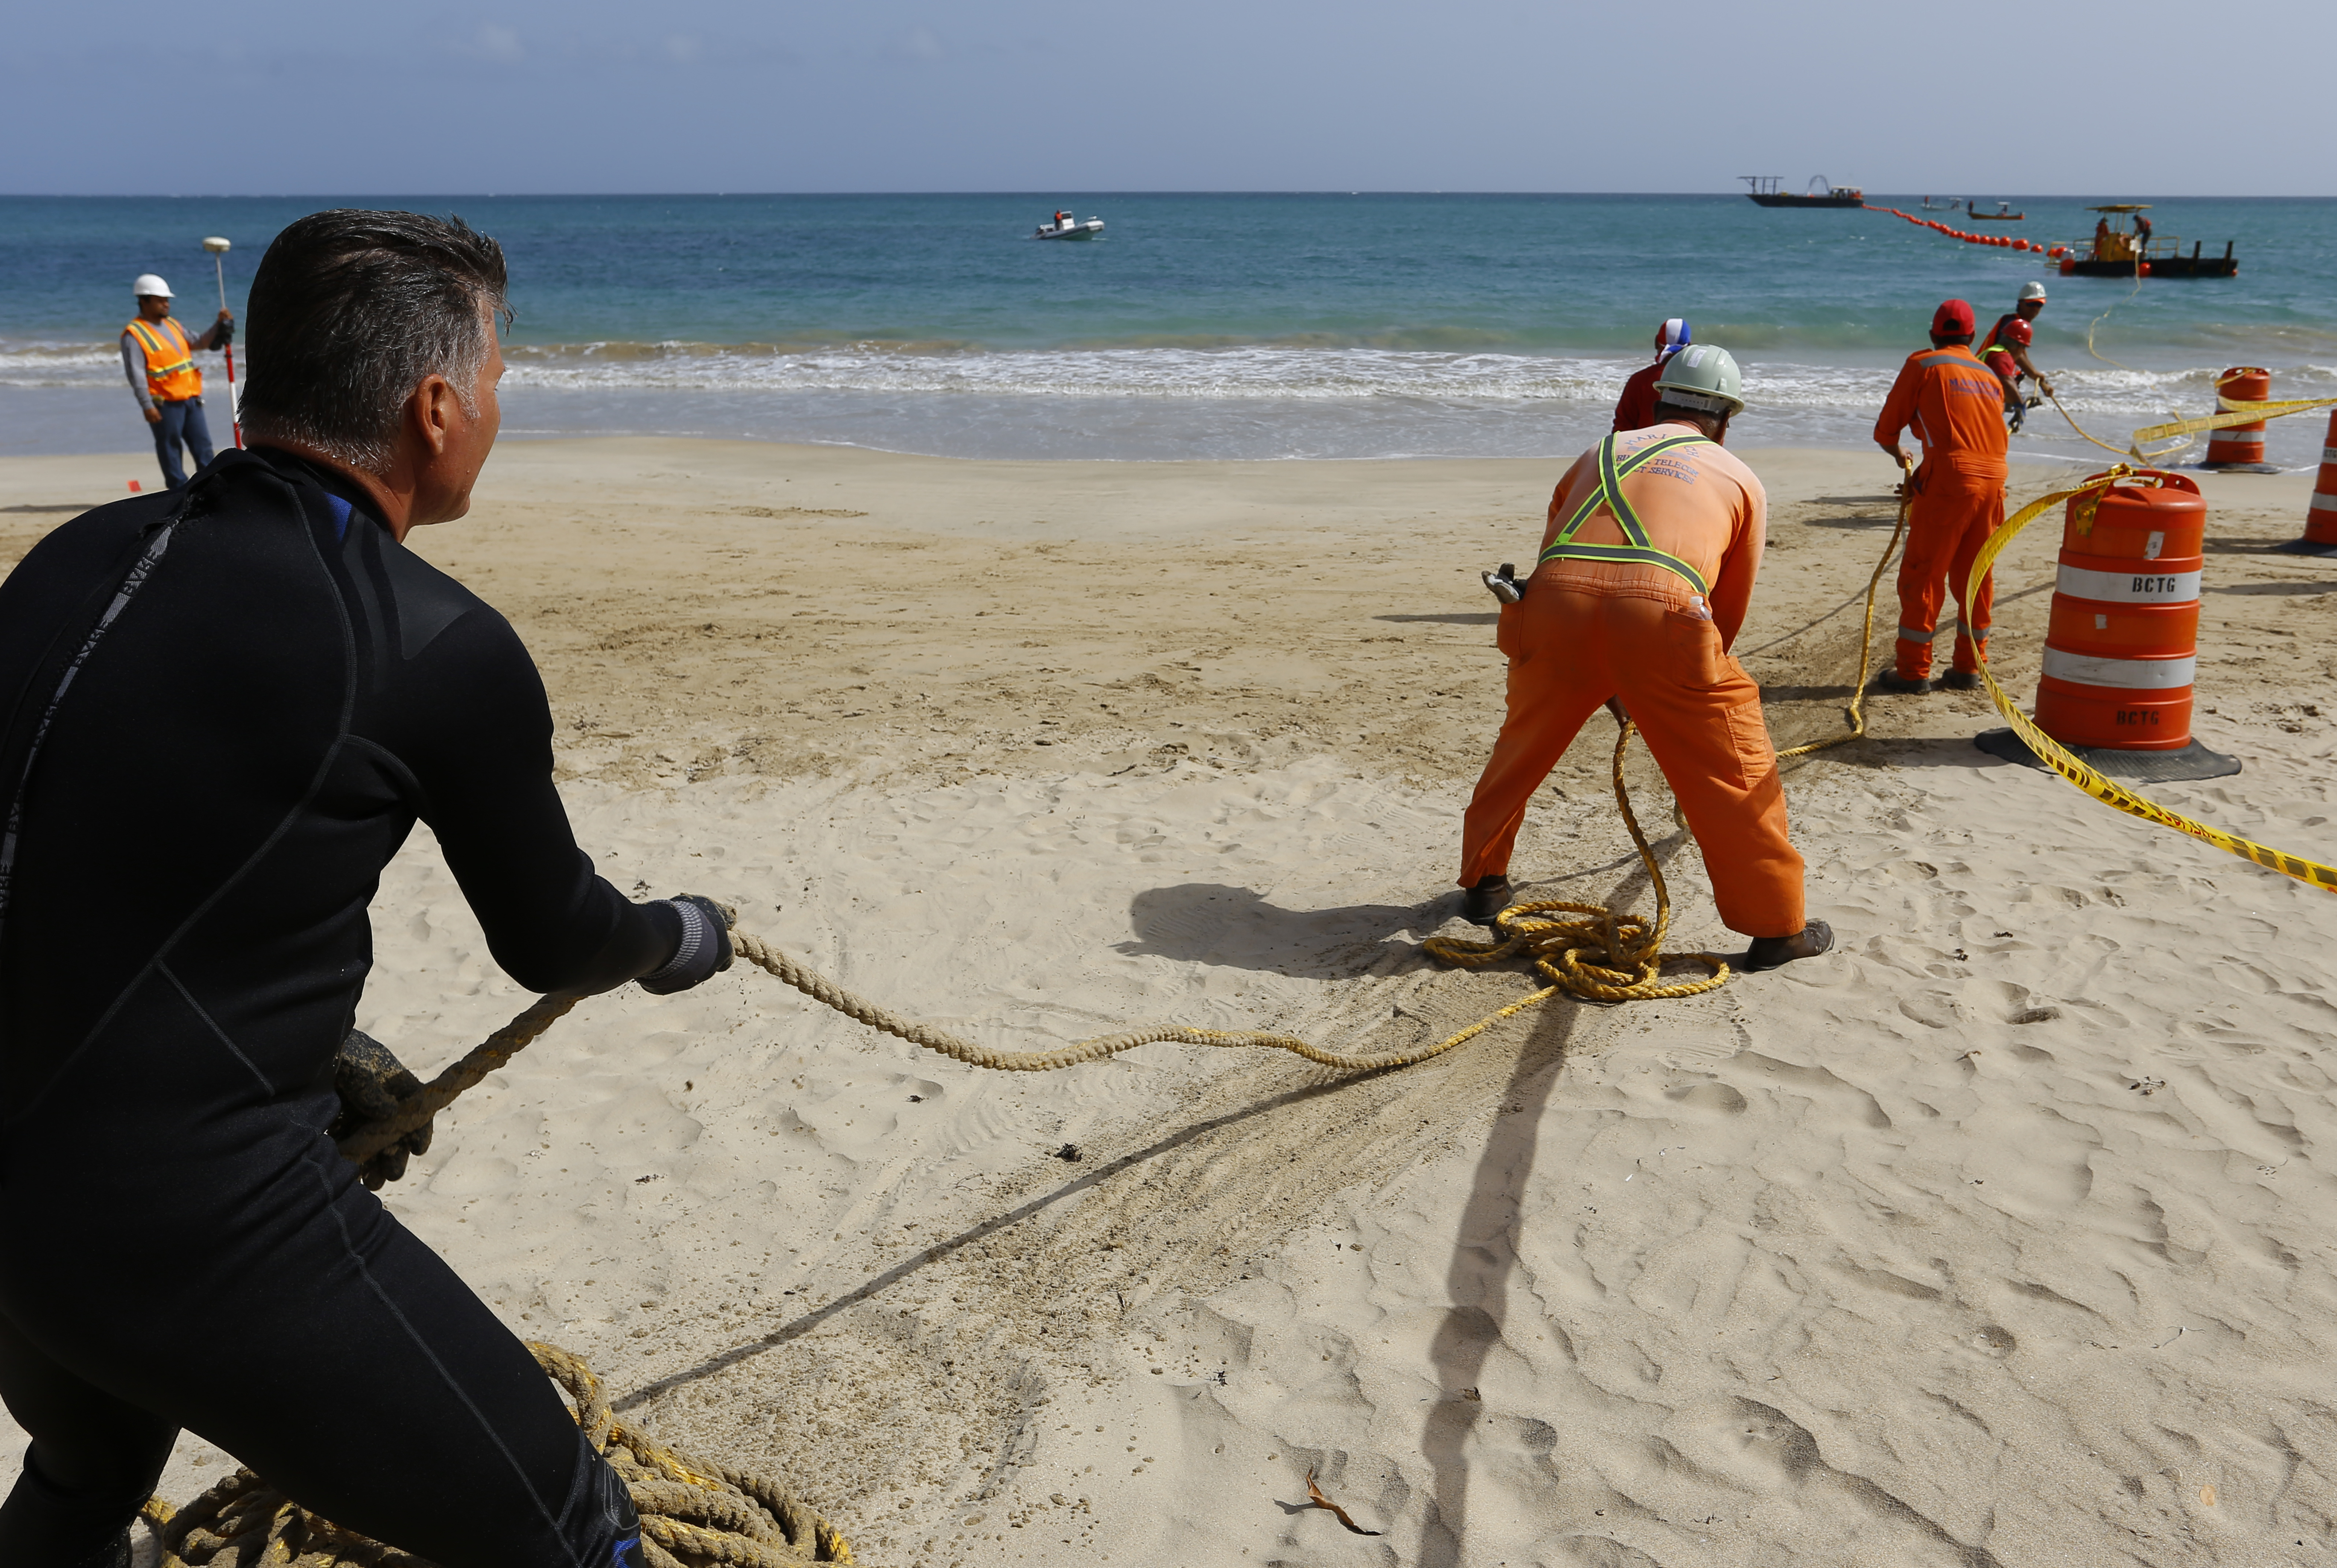 Cutting submarine cables causes damage to civilian, military and government communications.